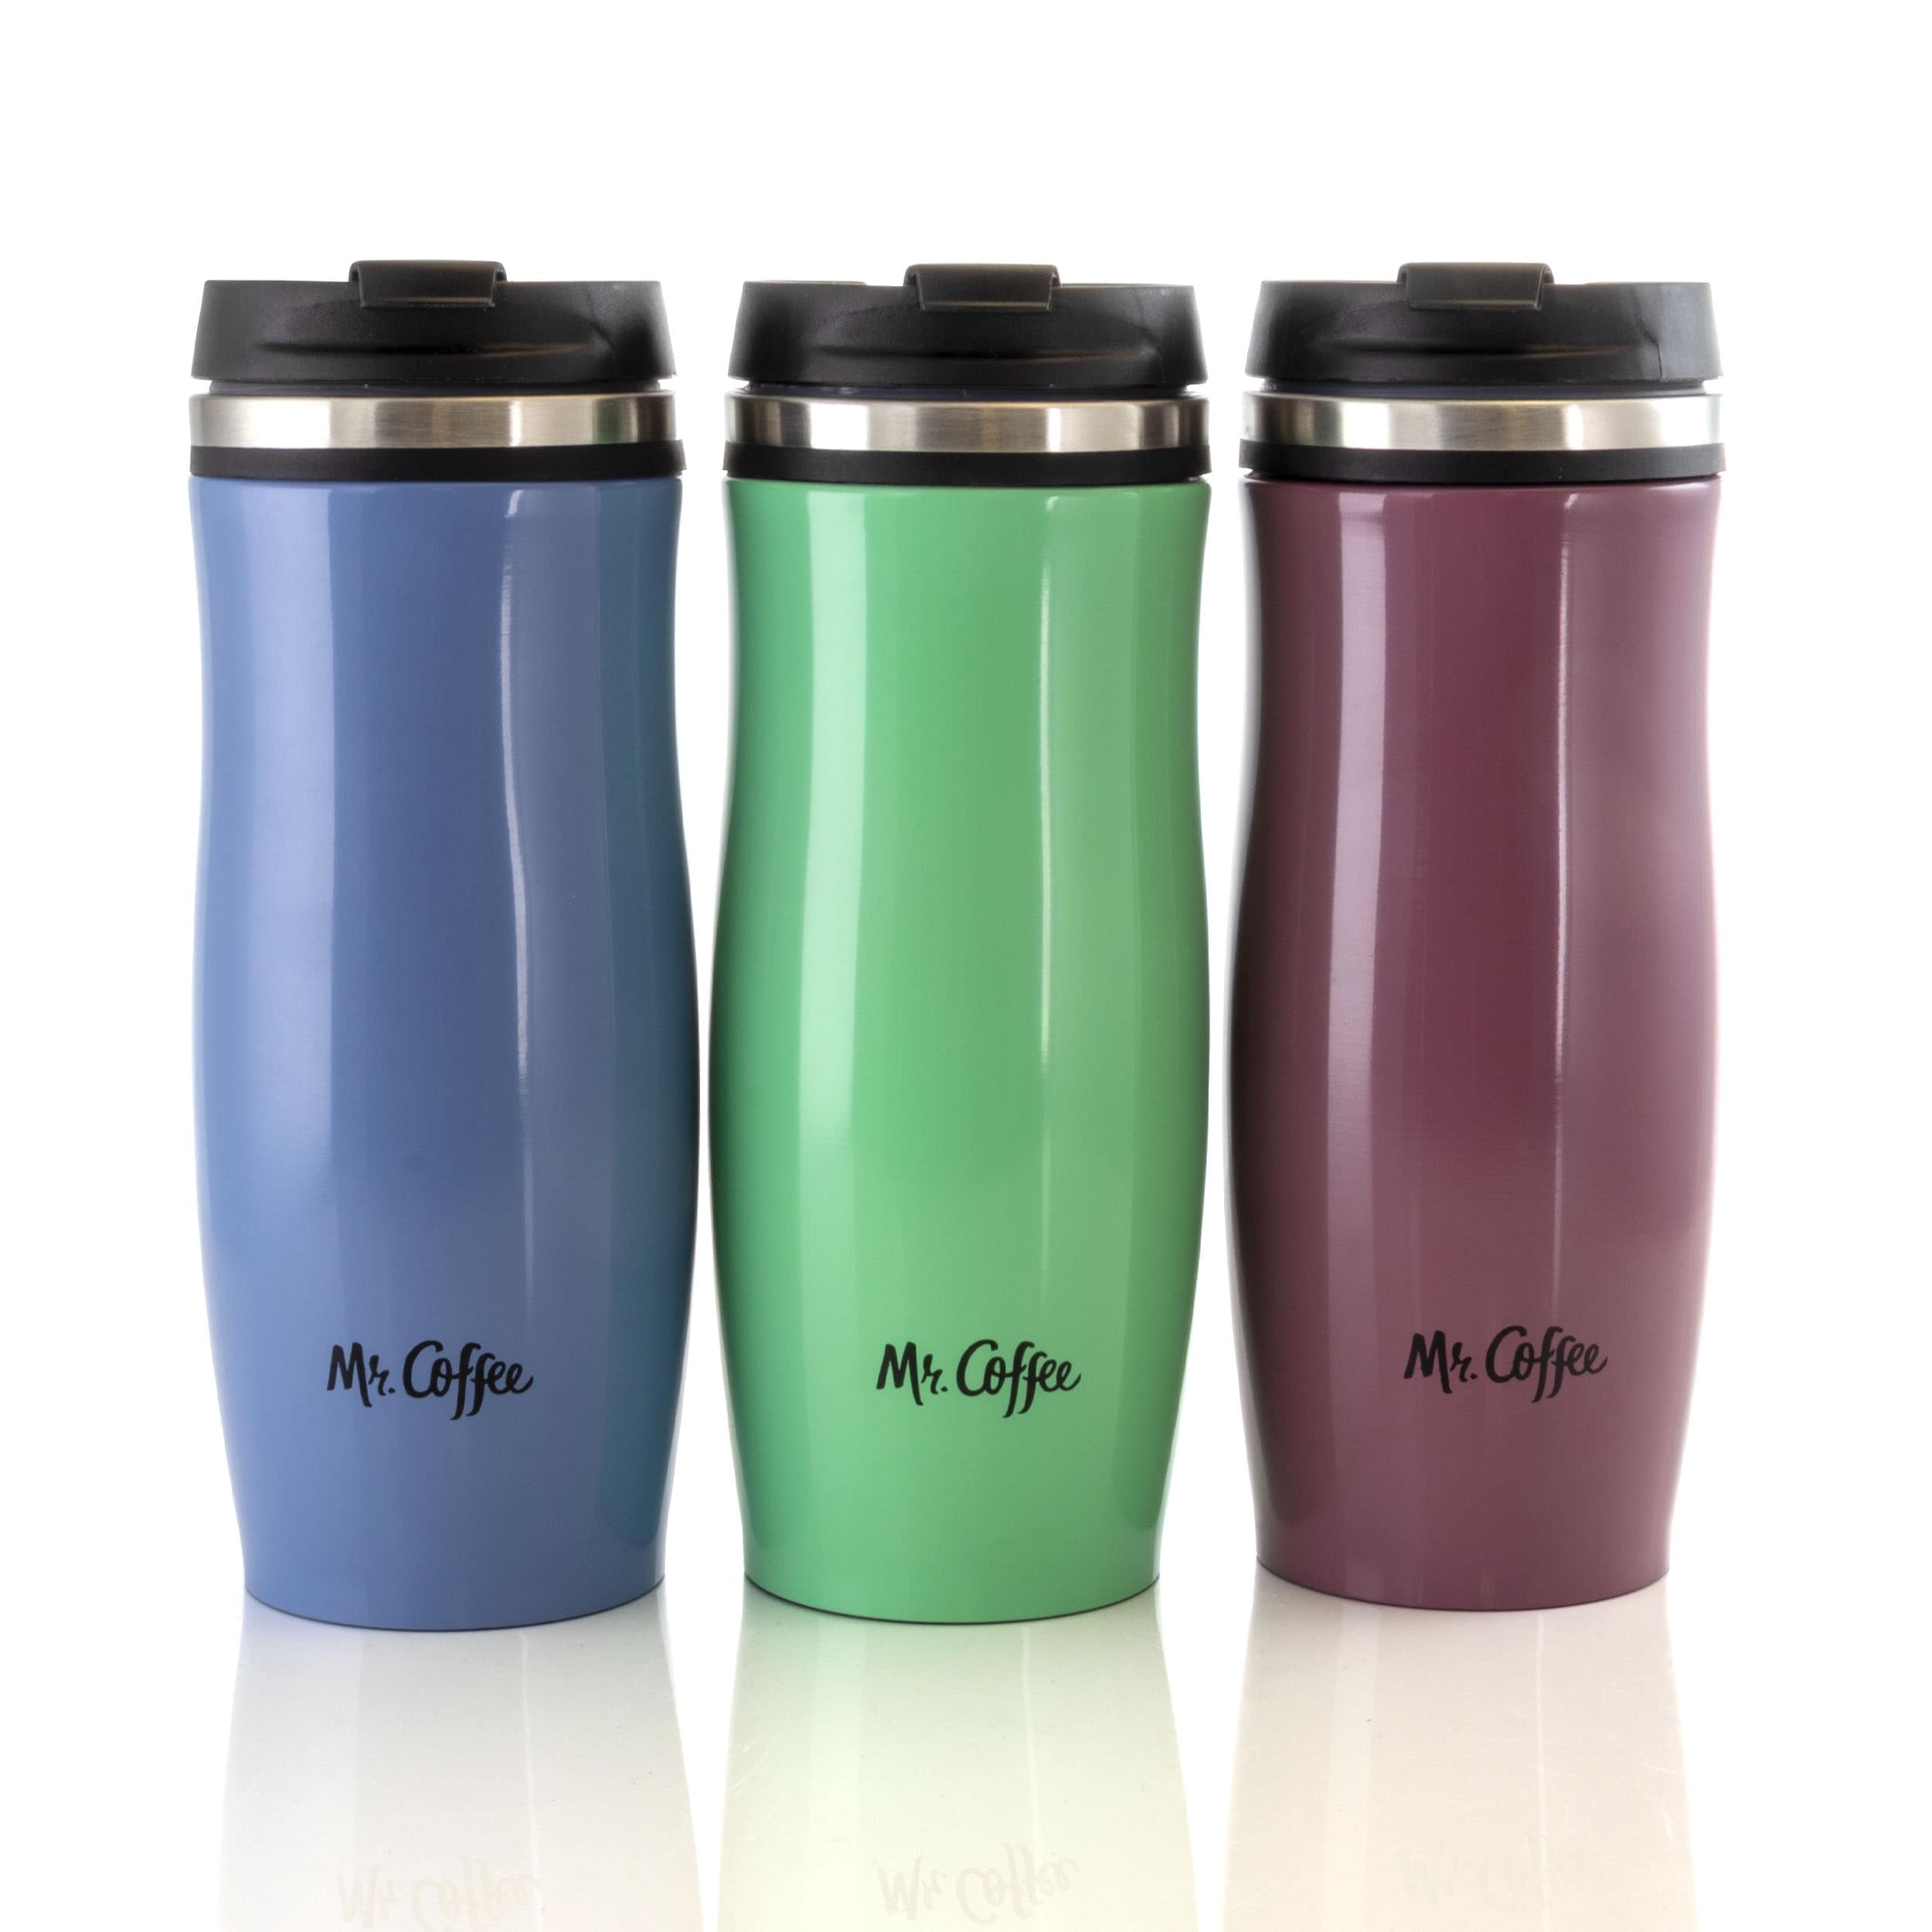 https://ak1.ostkcdn.com/images/products/is/images/direct/d9e87943d675f51a5f5bd9e43a11cd0fb132f08a/Mr.-Coffee-12.5-Oz-Stainless-Steel-Insulated-Thermal-Set-of-3.jpg